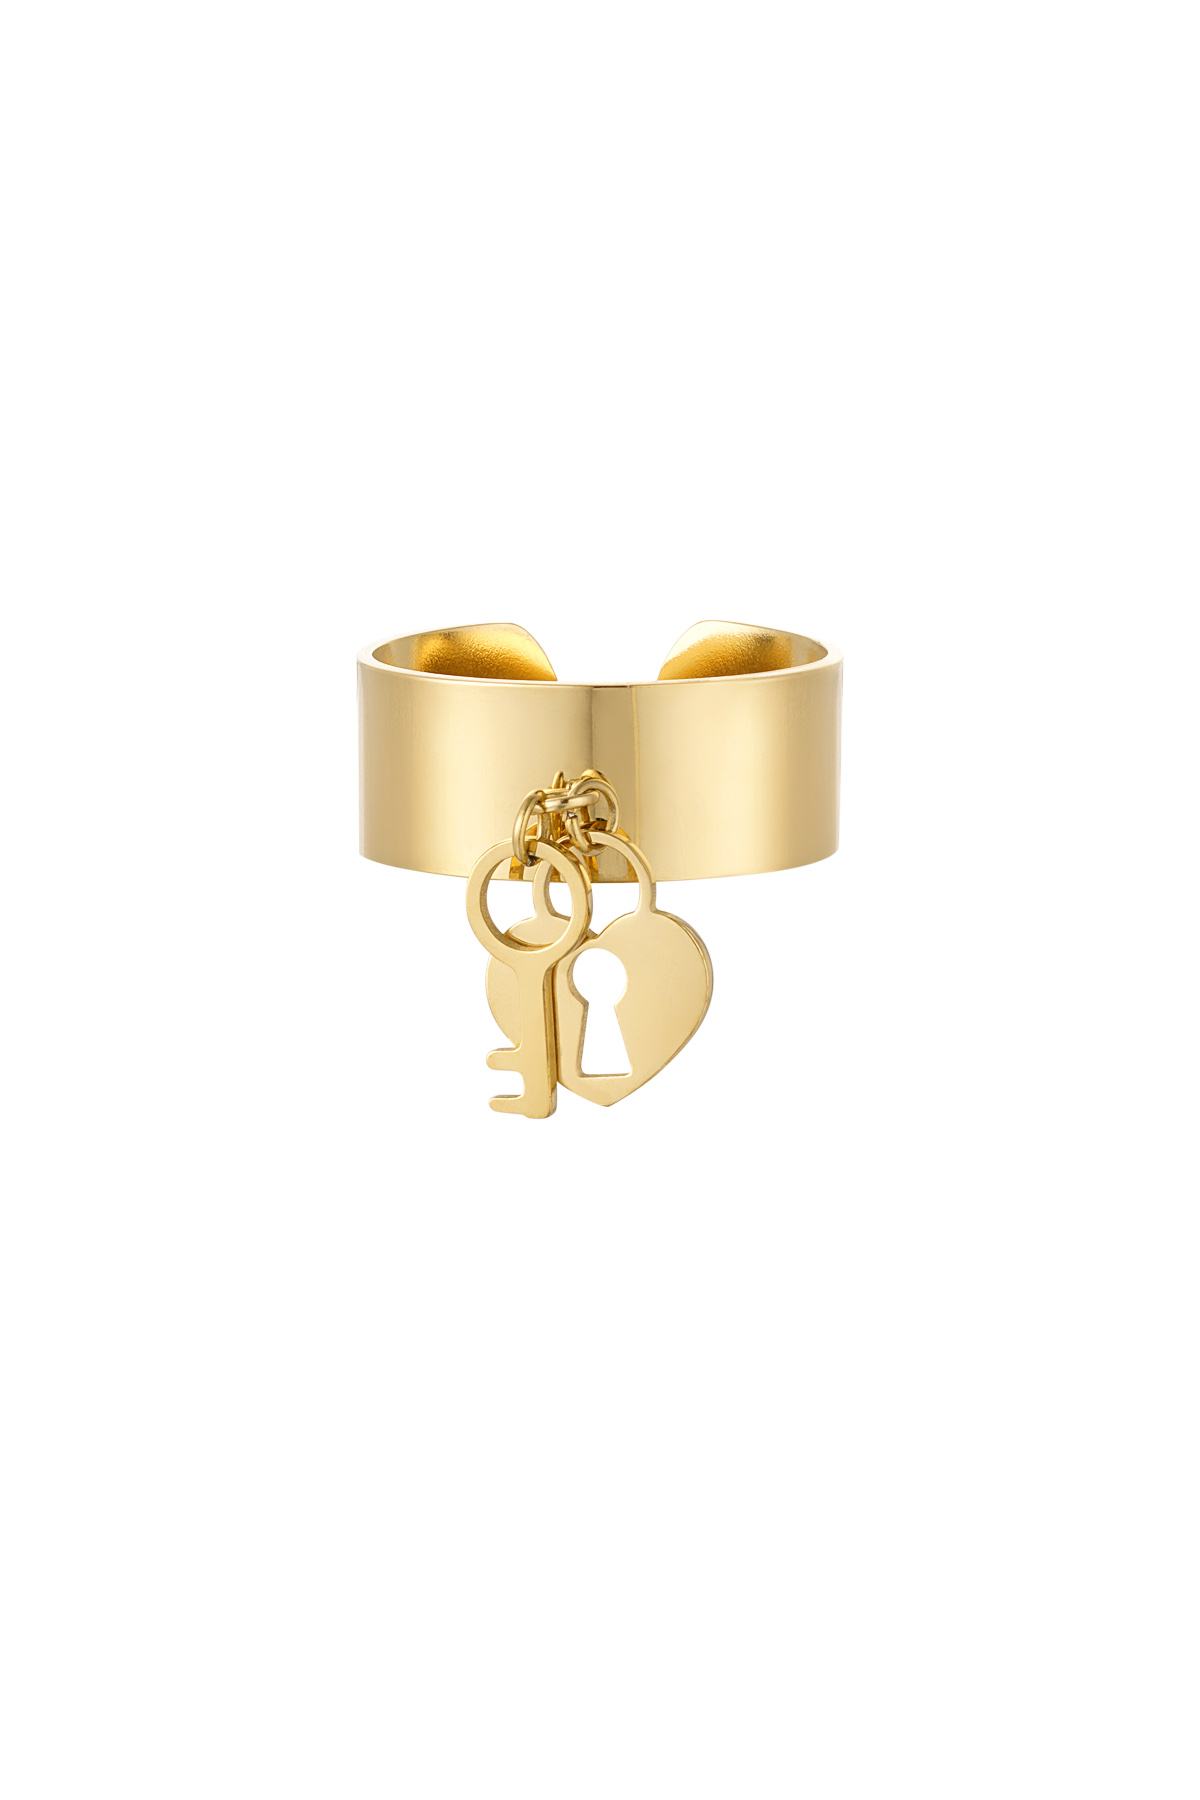 Ring lock and key - gold 